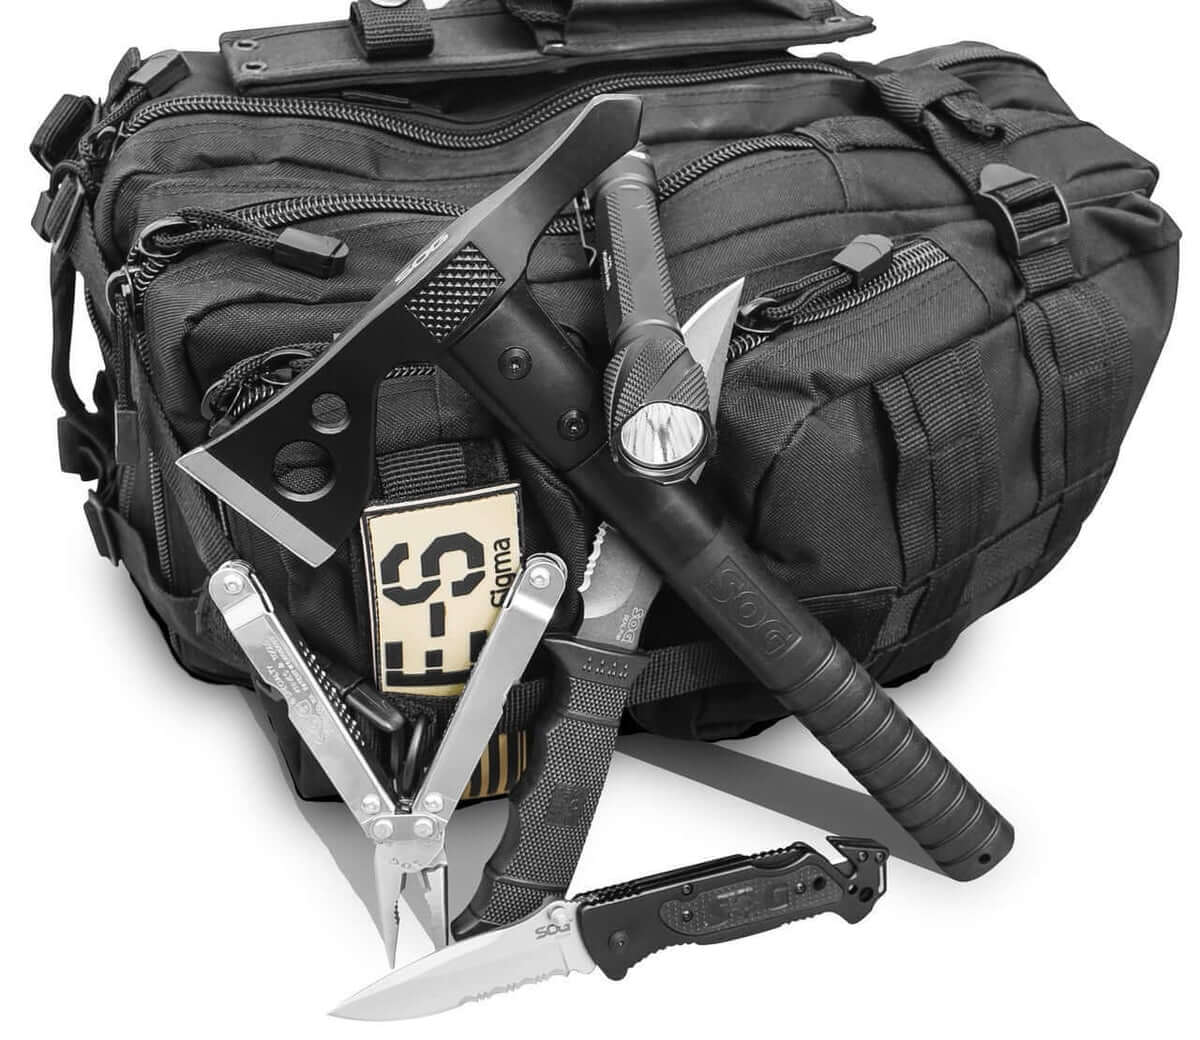 Survival gear kit backpack - Special Replicas